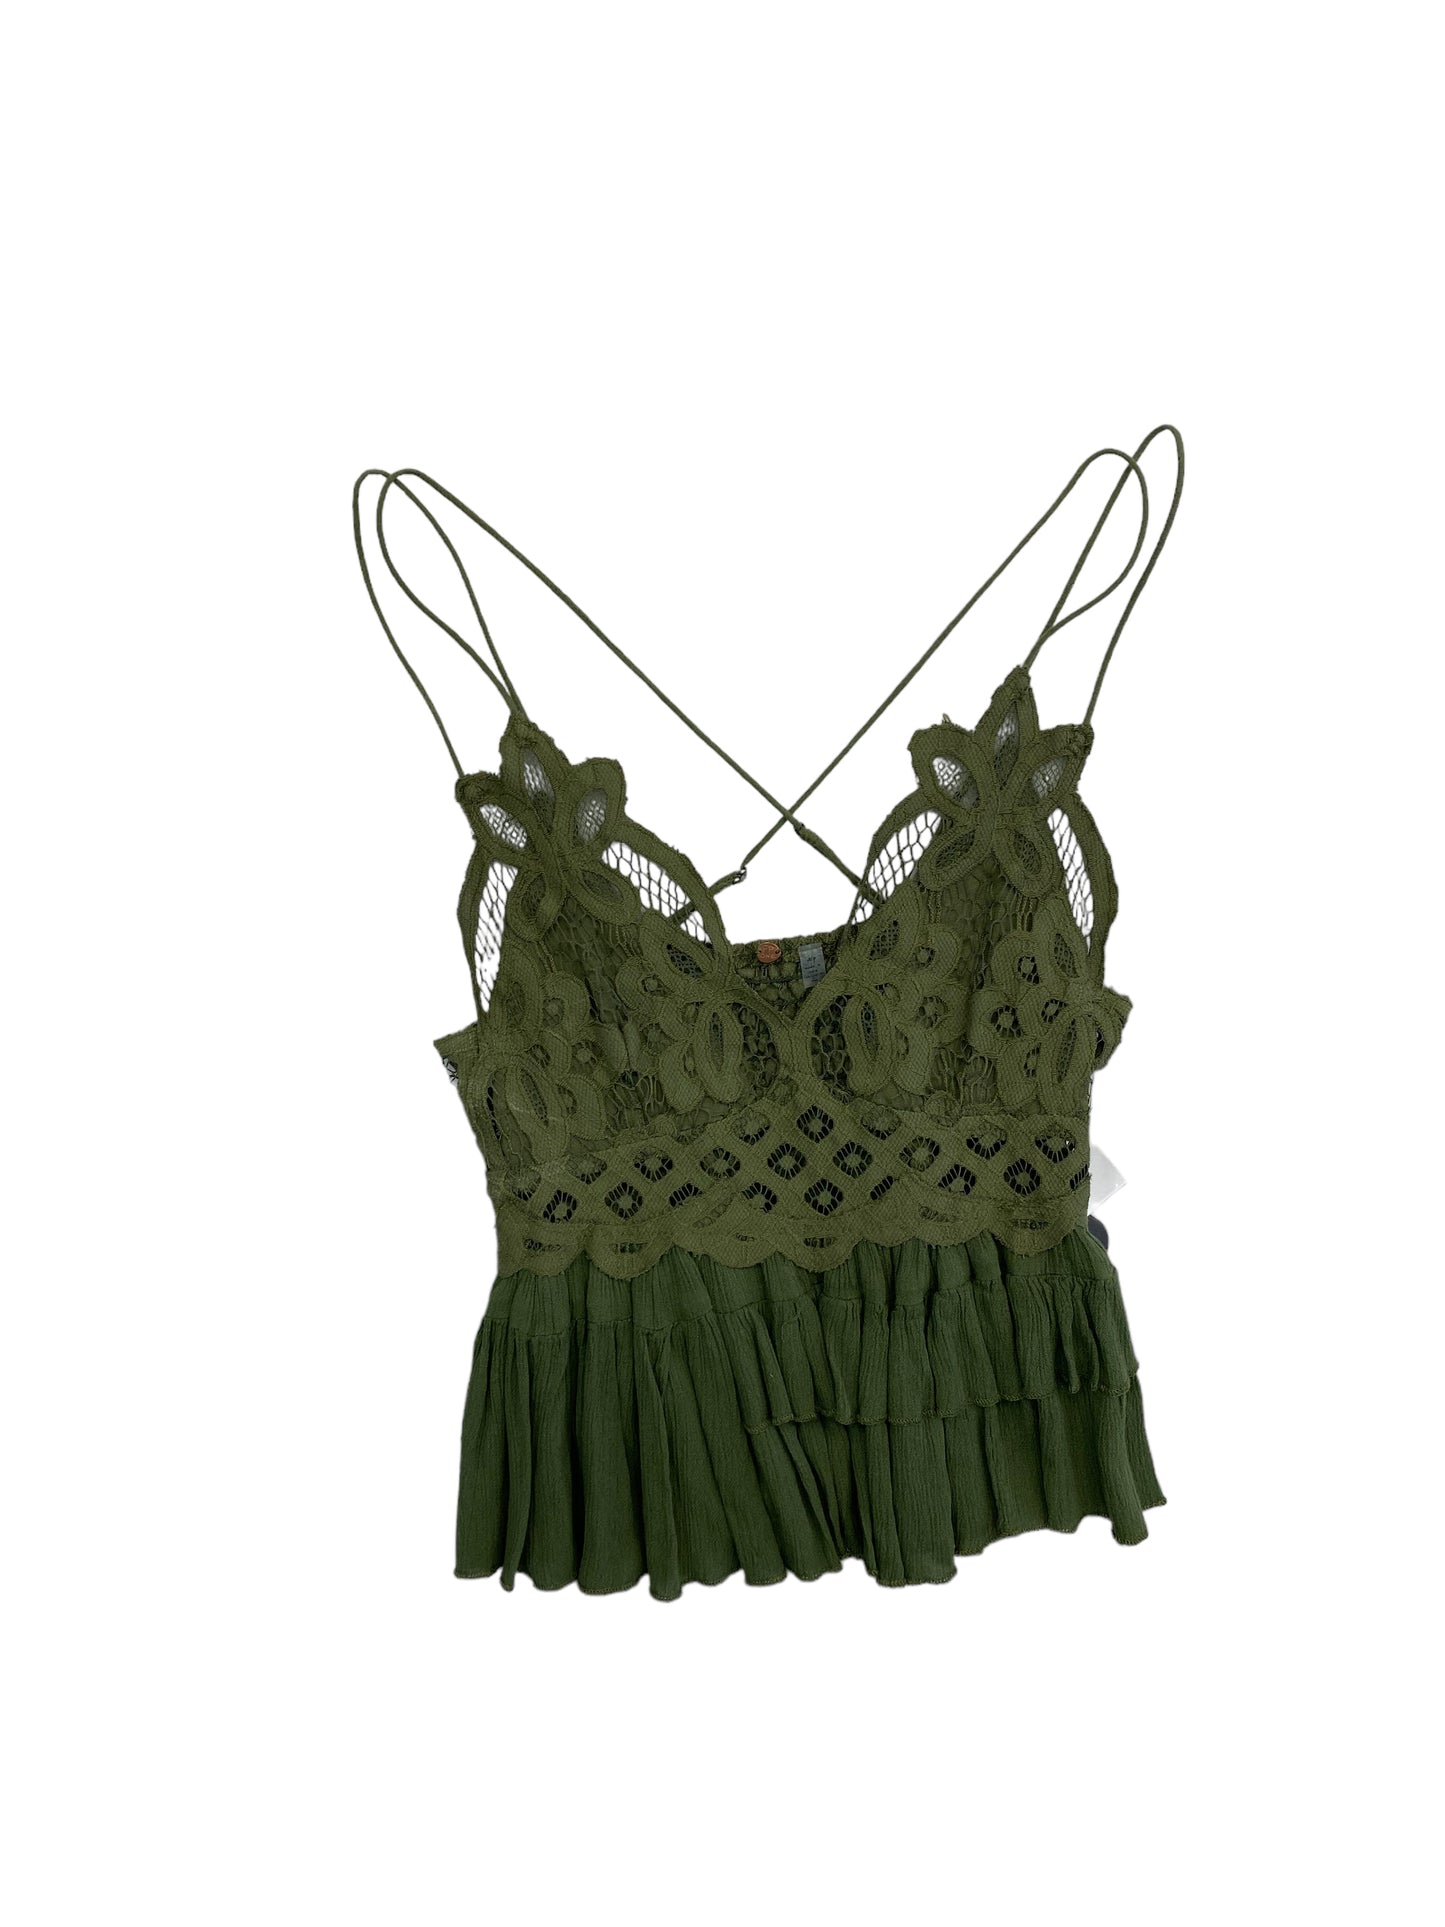 Green Top Sleeveless Free People, Size S